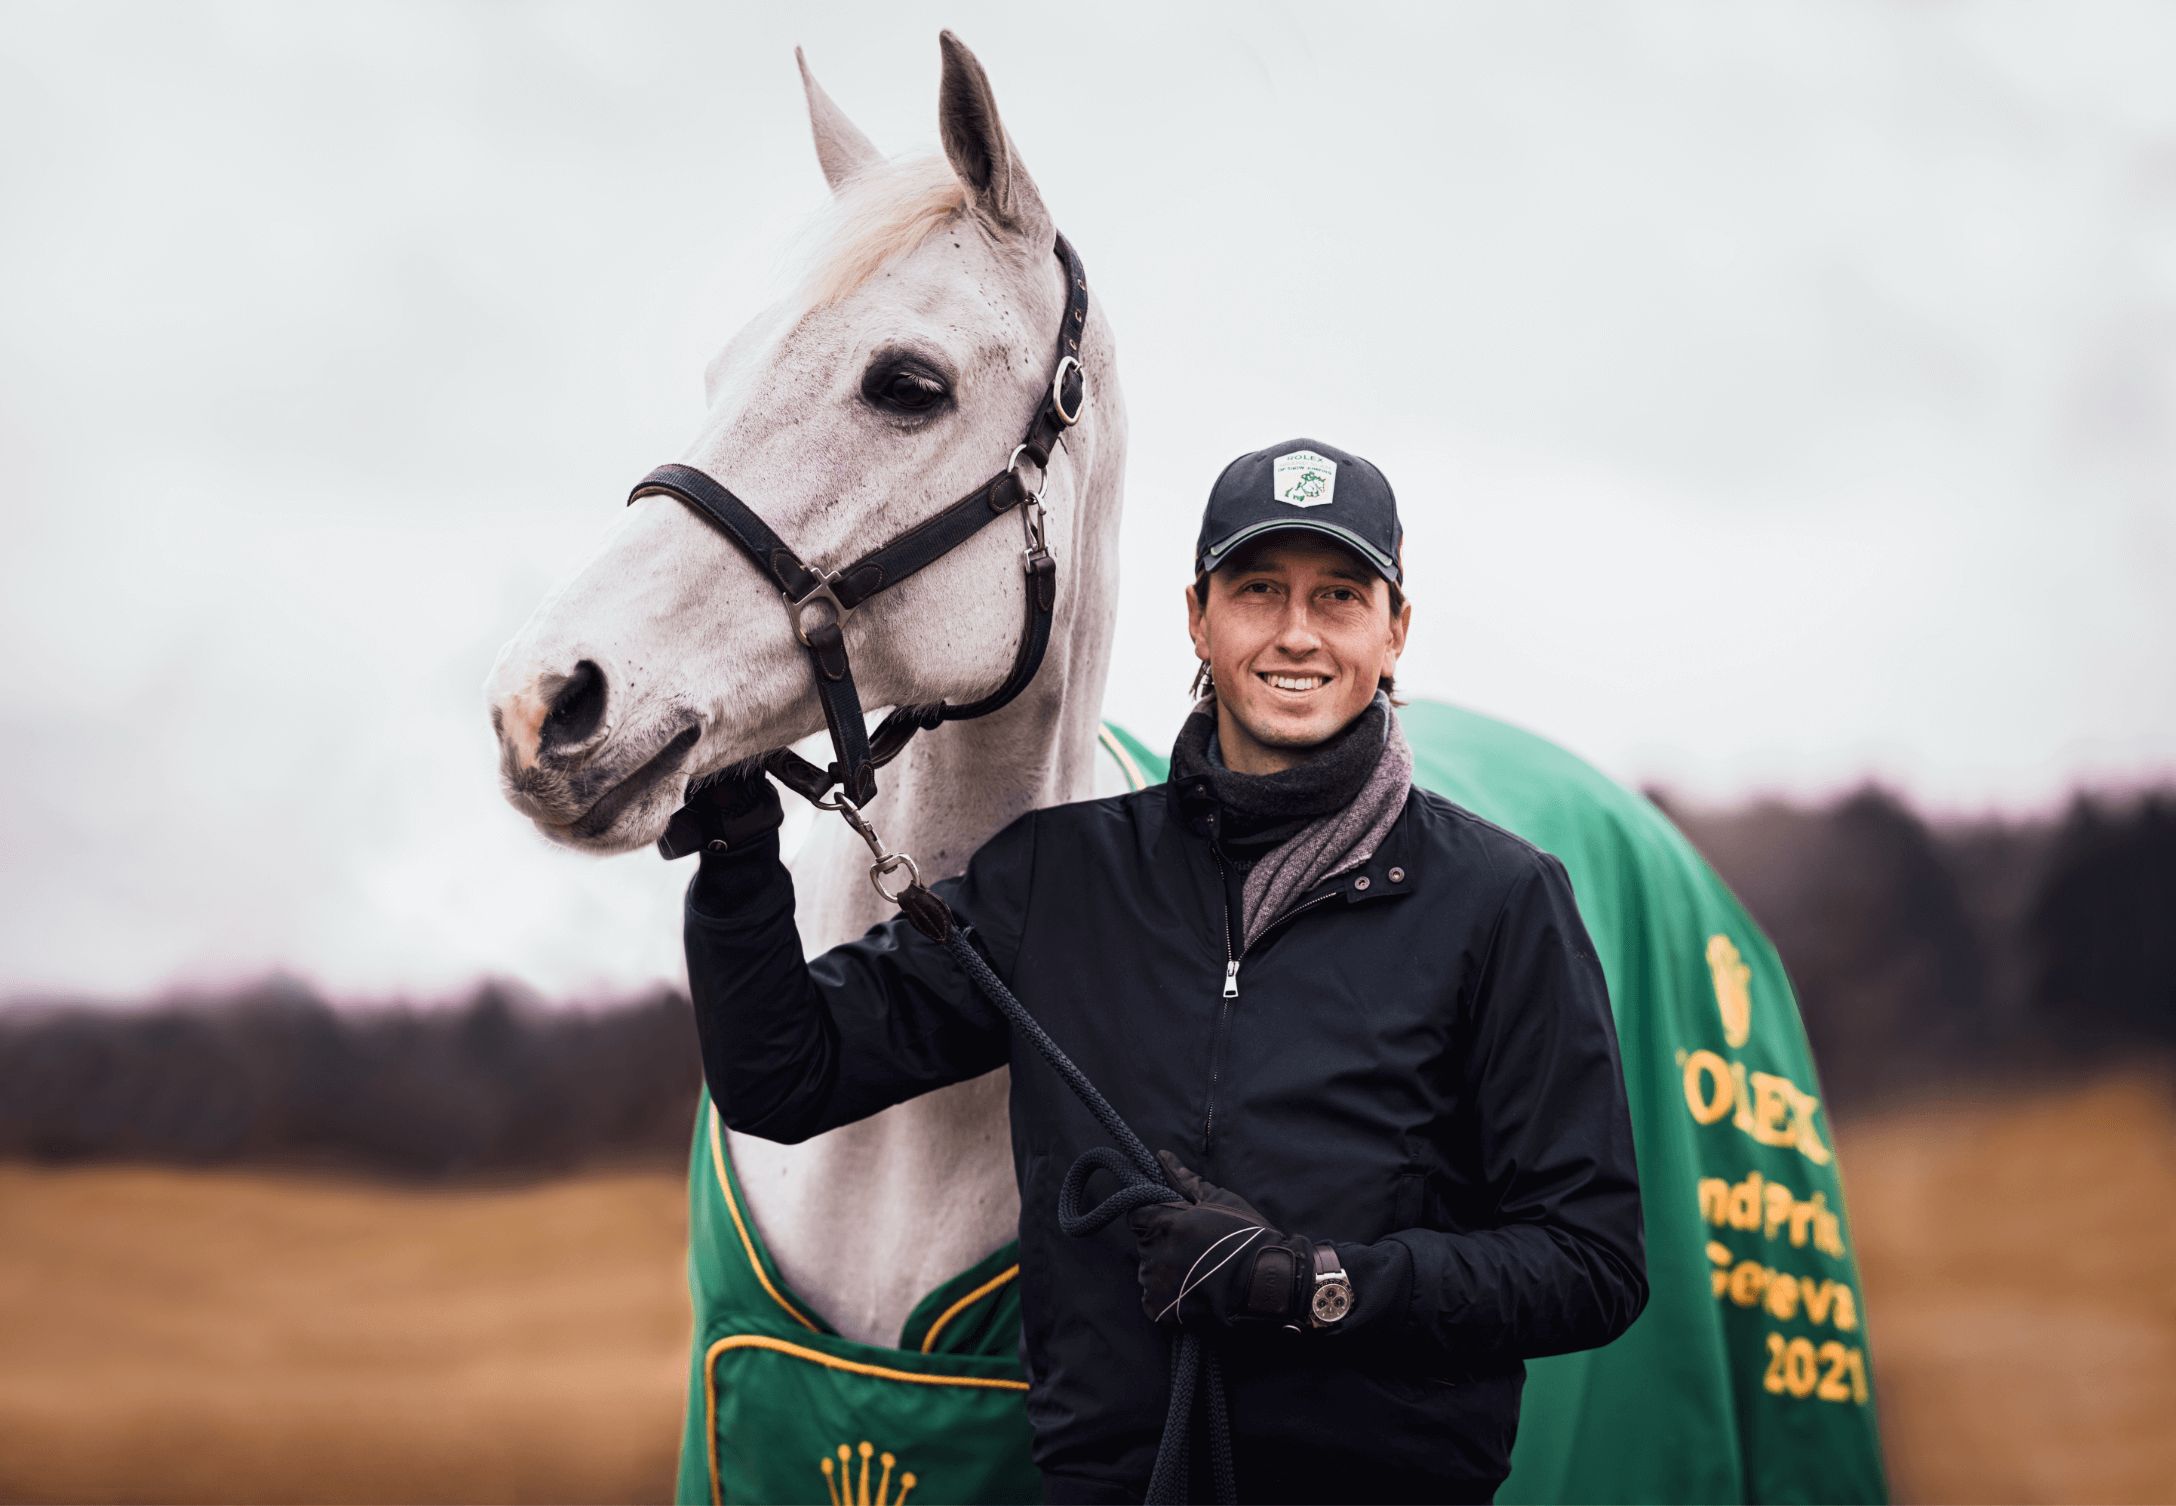 Martin Fuchs: "The Rolex Grand Slam offers us riders the unique opportunity to write history in our sport."